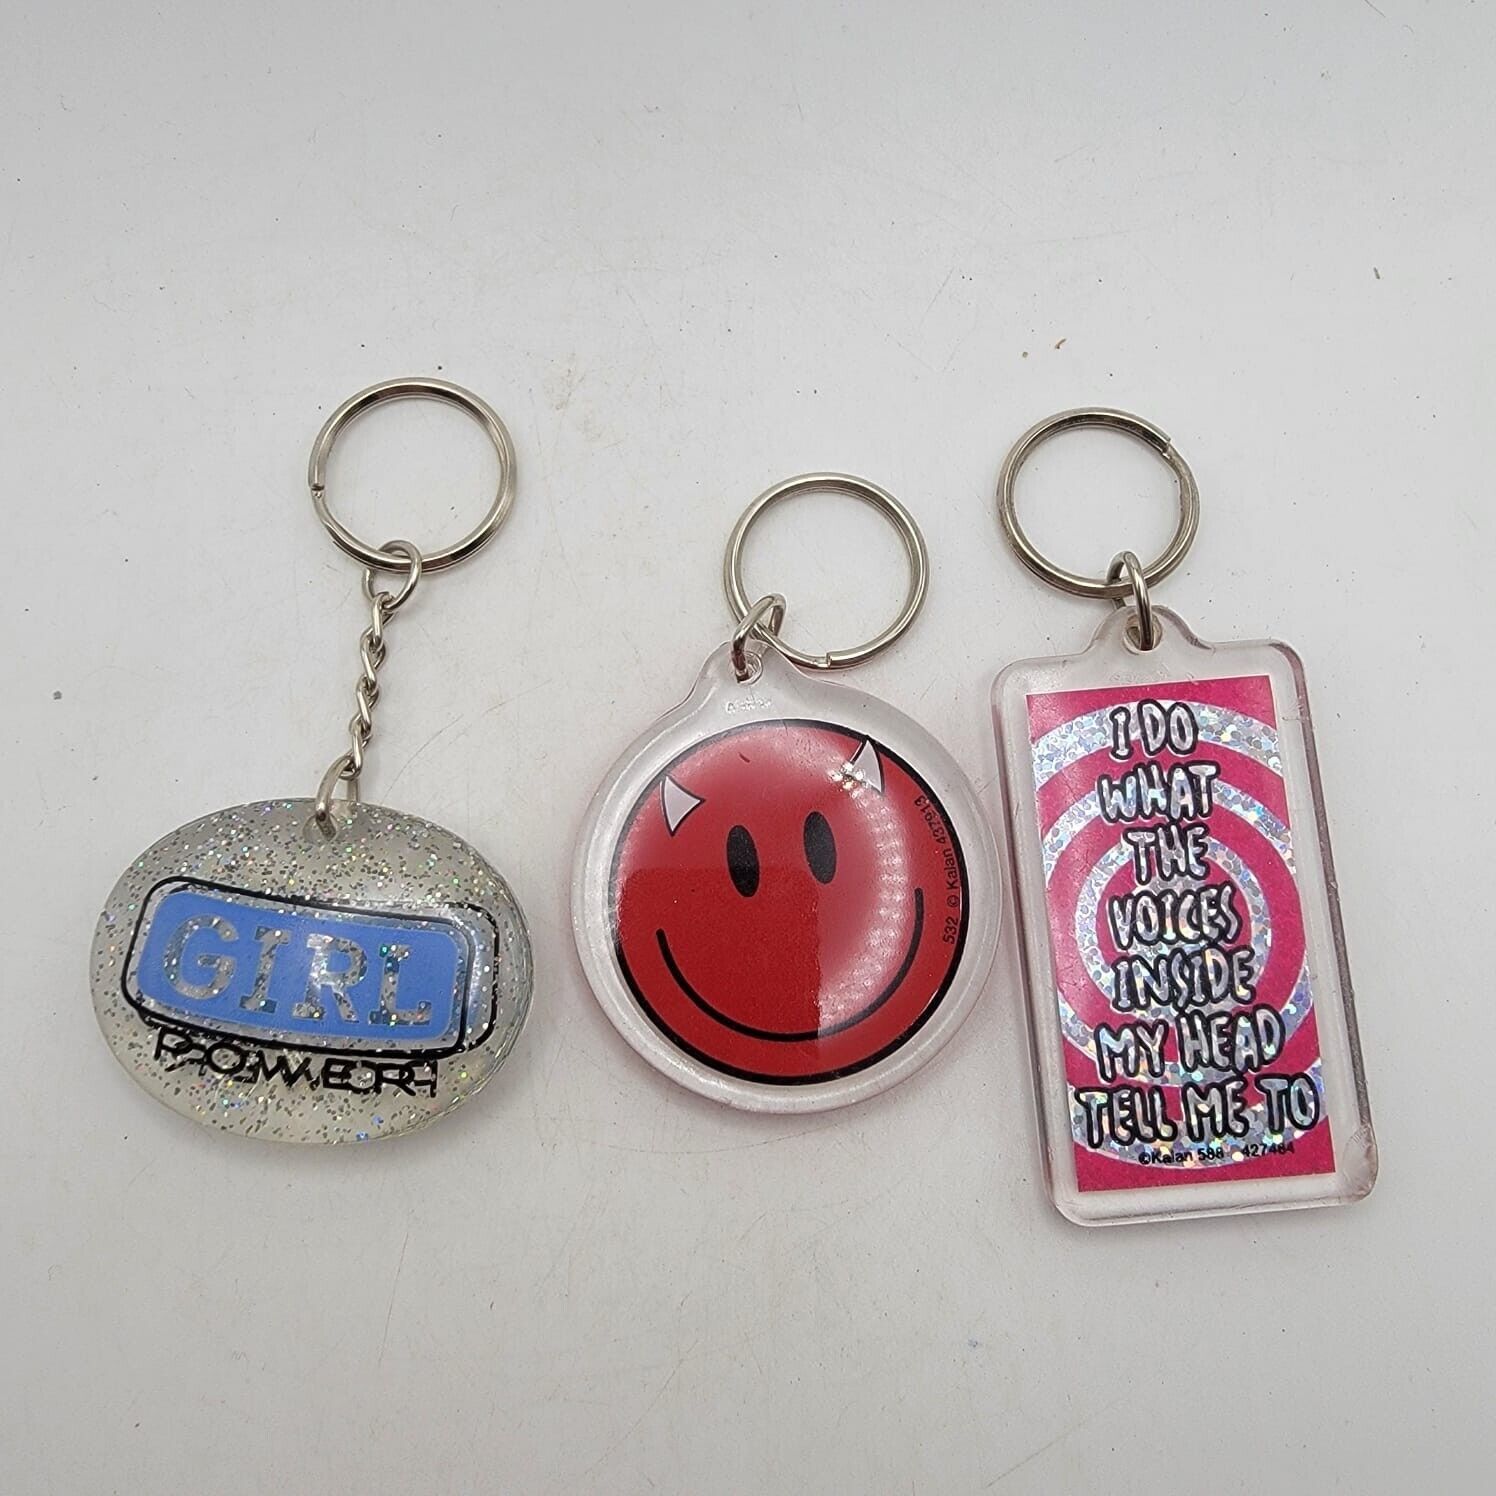 Lot Of 3 Vintage Meme Graphic Keychains Graphics 90’s Girl Power Smiley Face